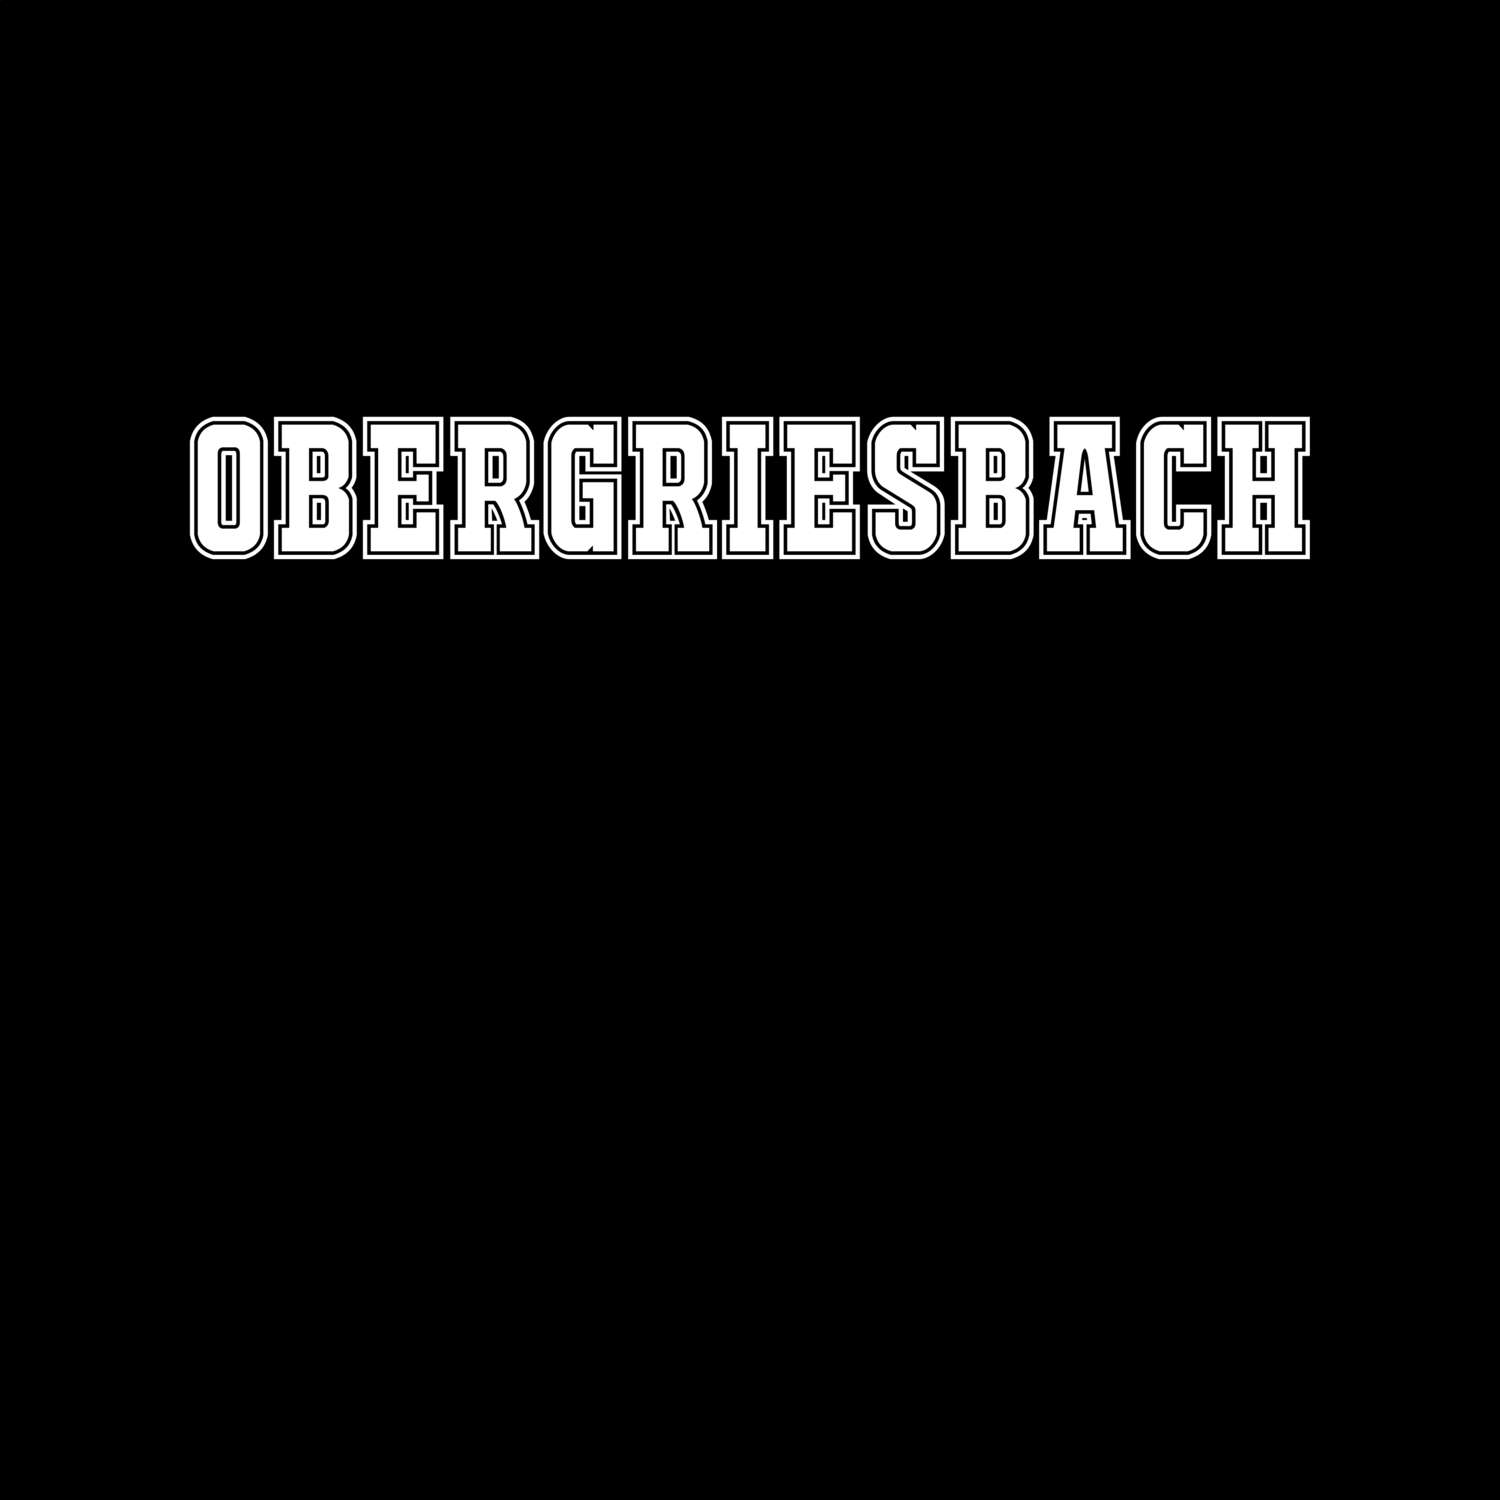 Obergriesbach T-Shirt »Classic«